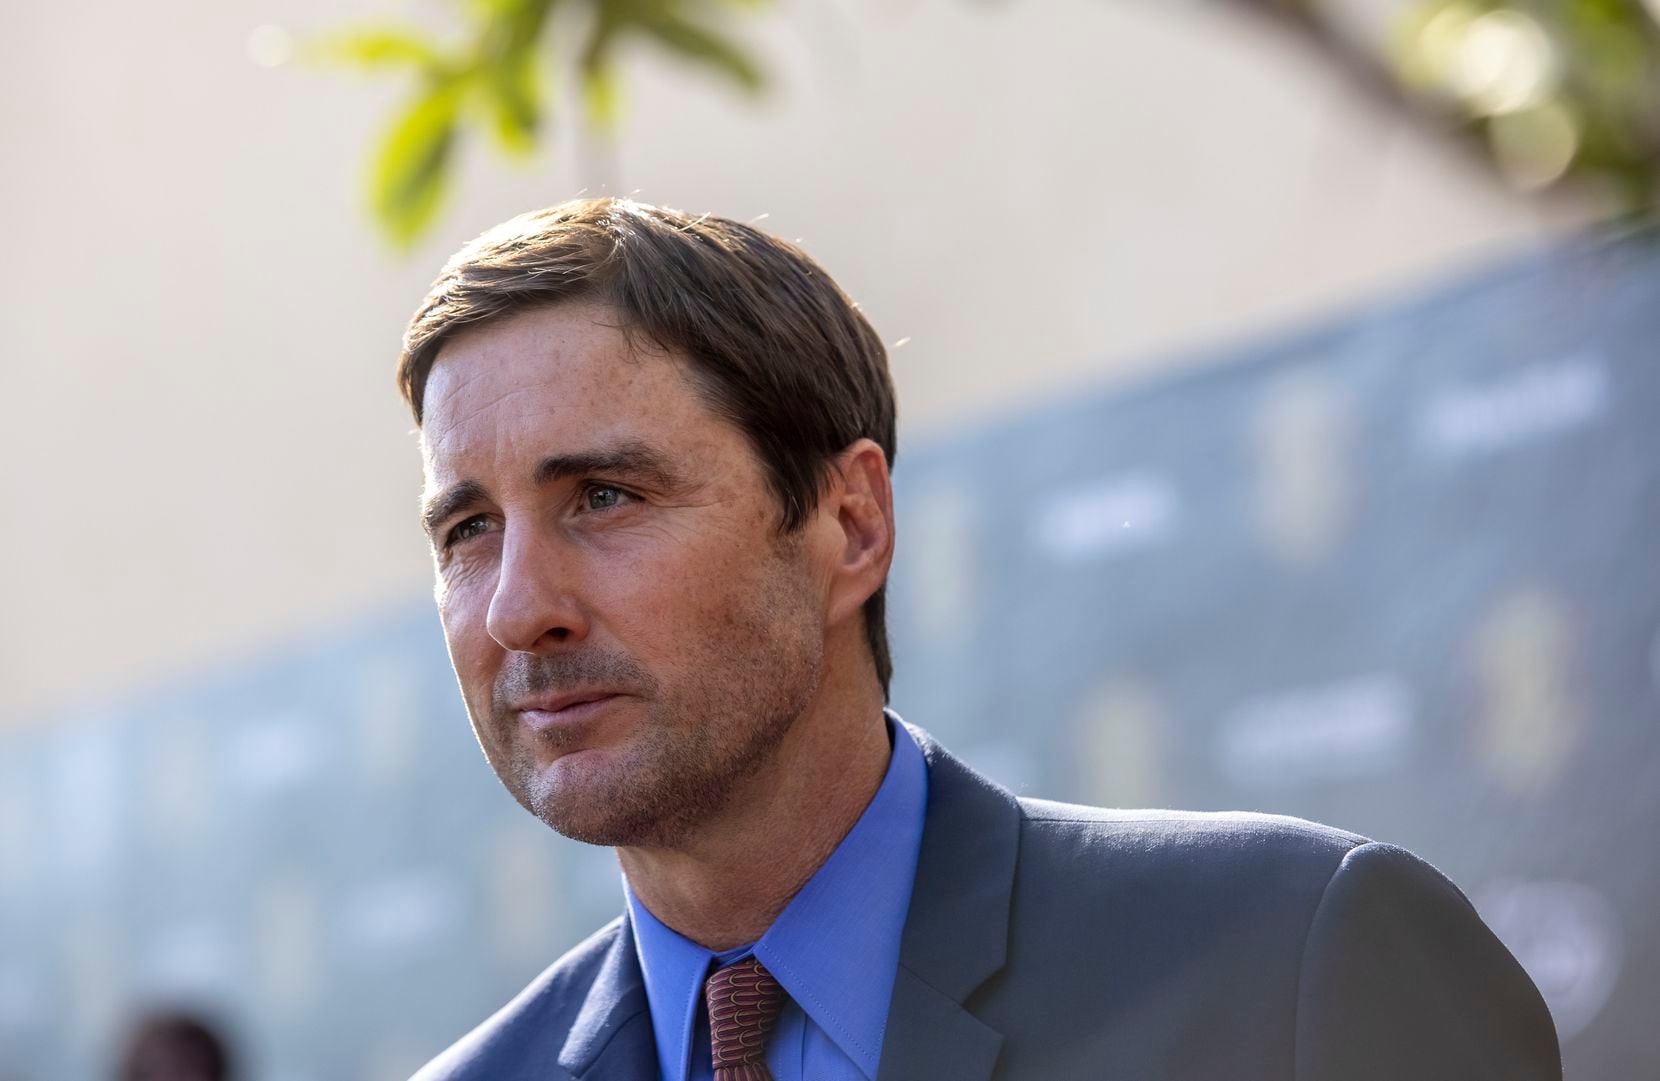 Luke Wilson attends the premiere of “12 Mighty Orphans” at the ISIS Theater.